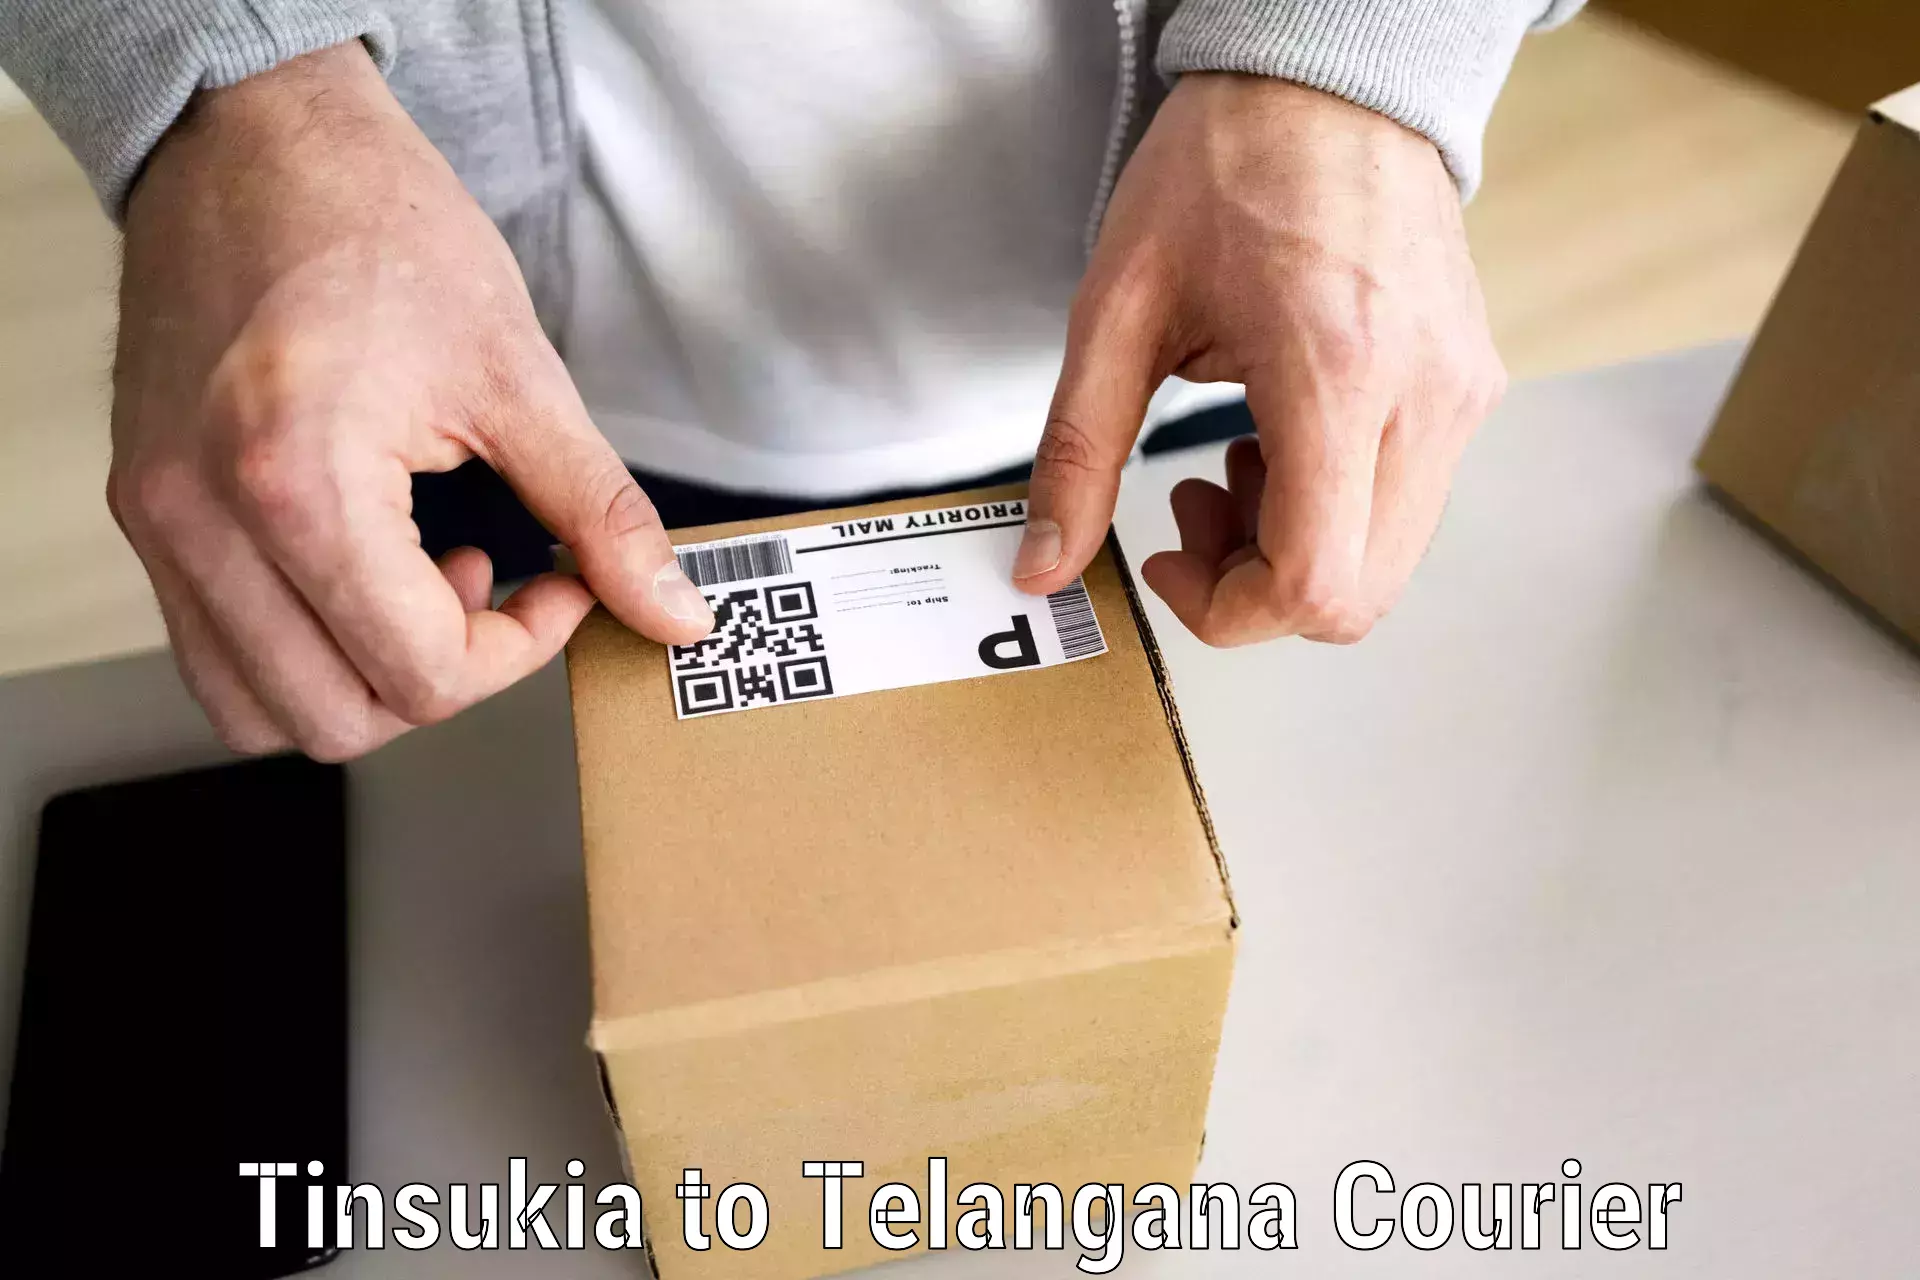 Efficient packing services Tinsukia to Shamshabad